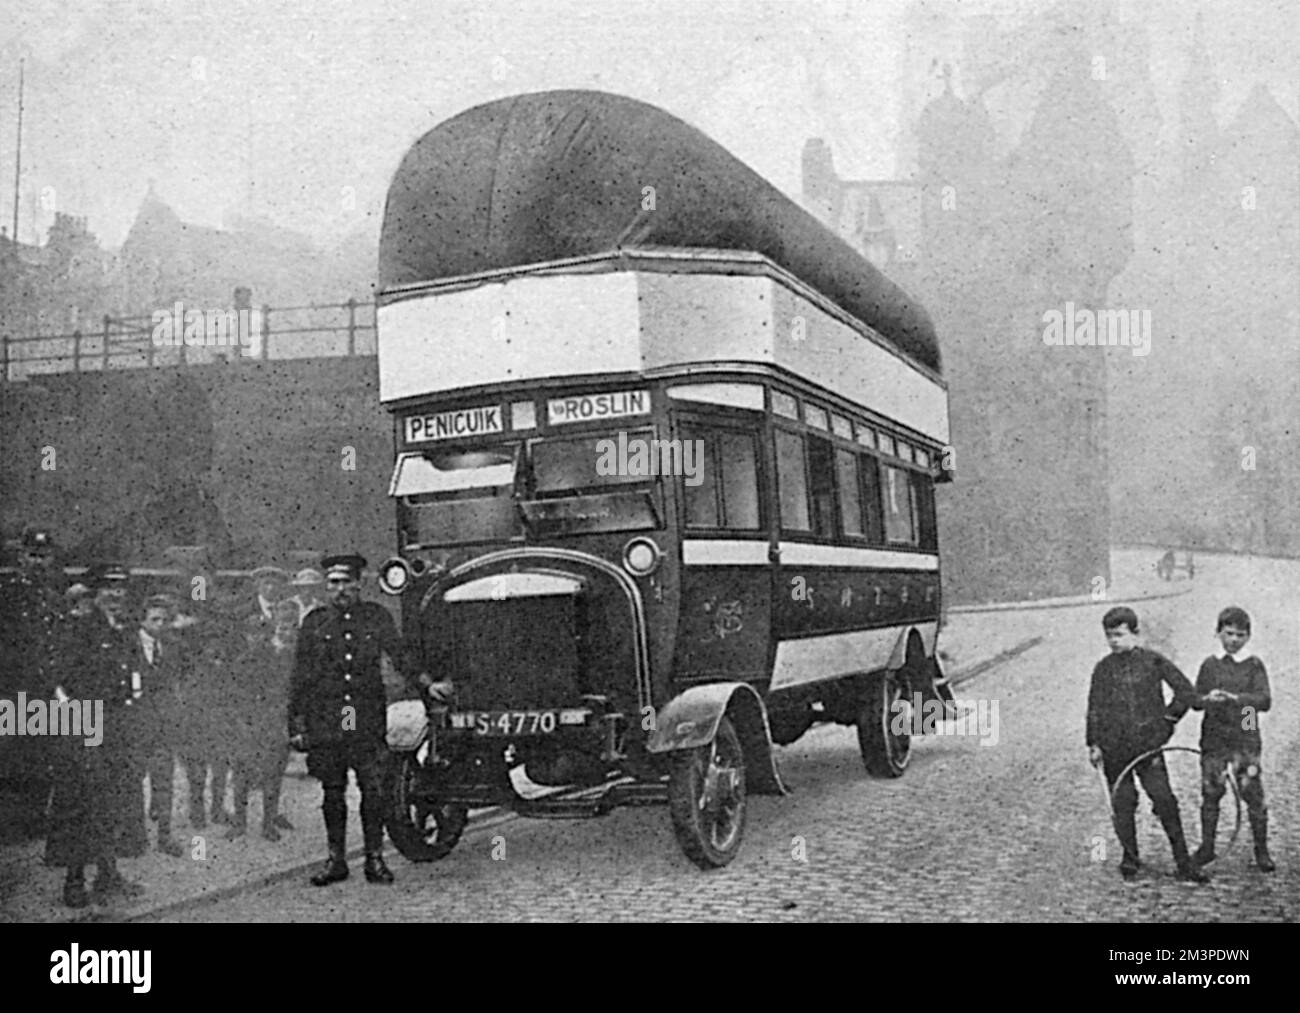 An example of a coal gas powered vehicle in Edinburgh - in this case a bus which holds a voluminous rubber bag for the gas on its roof.  Coal-gas powered vehicles were used during the First World War in place of petrol which had become increasingly scarce.     Date: 1917 Stock Photo